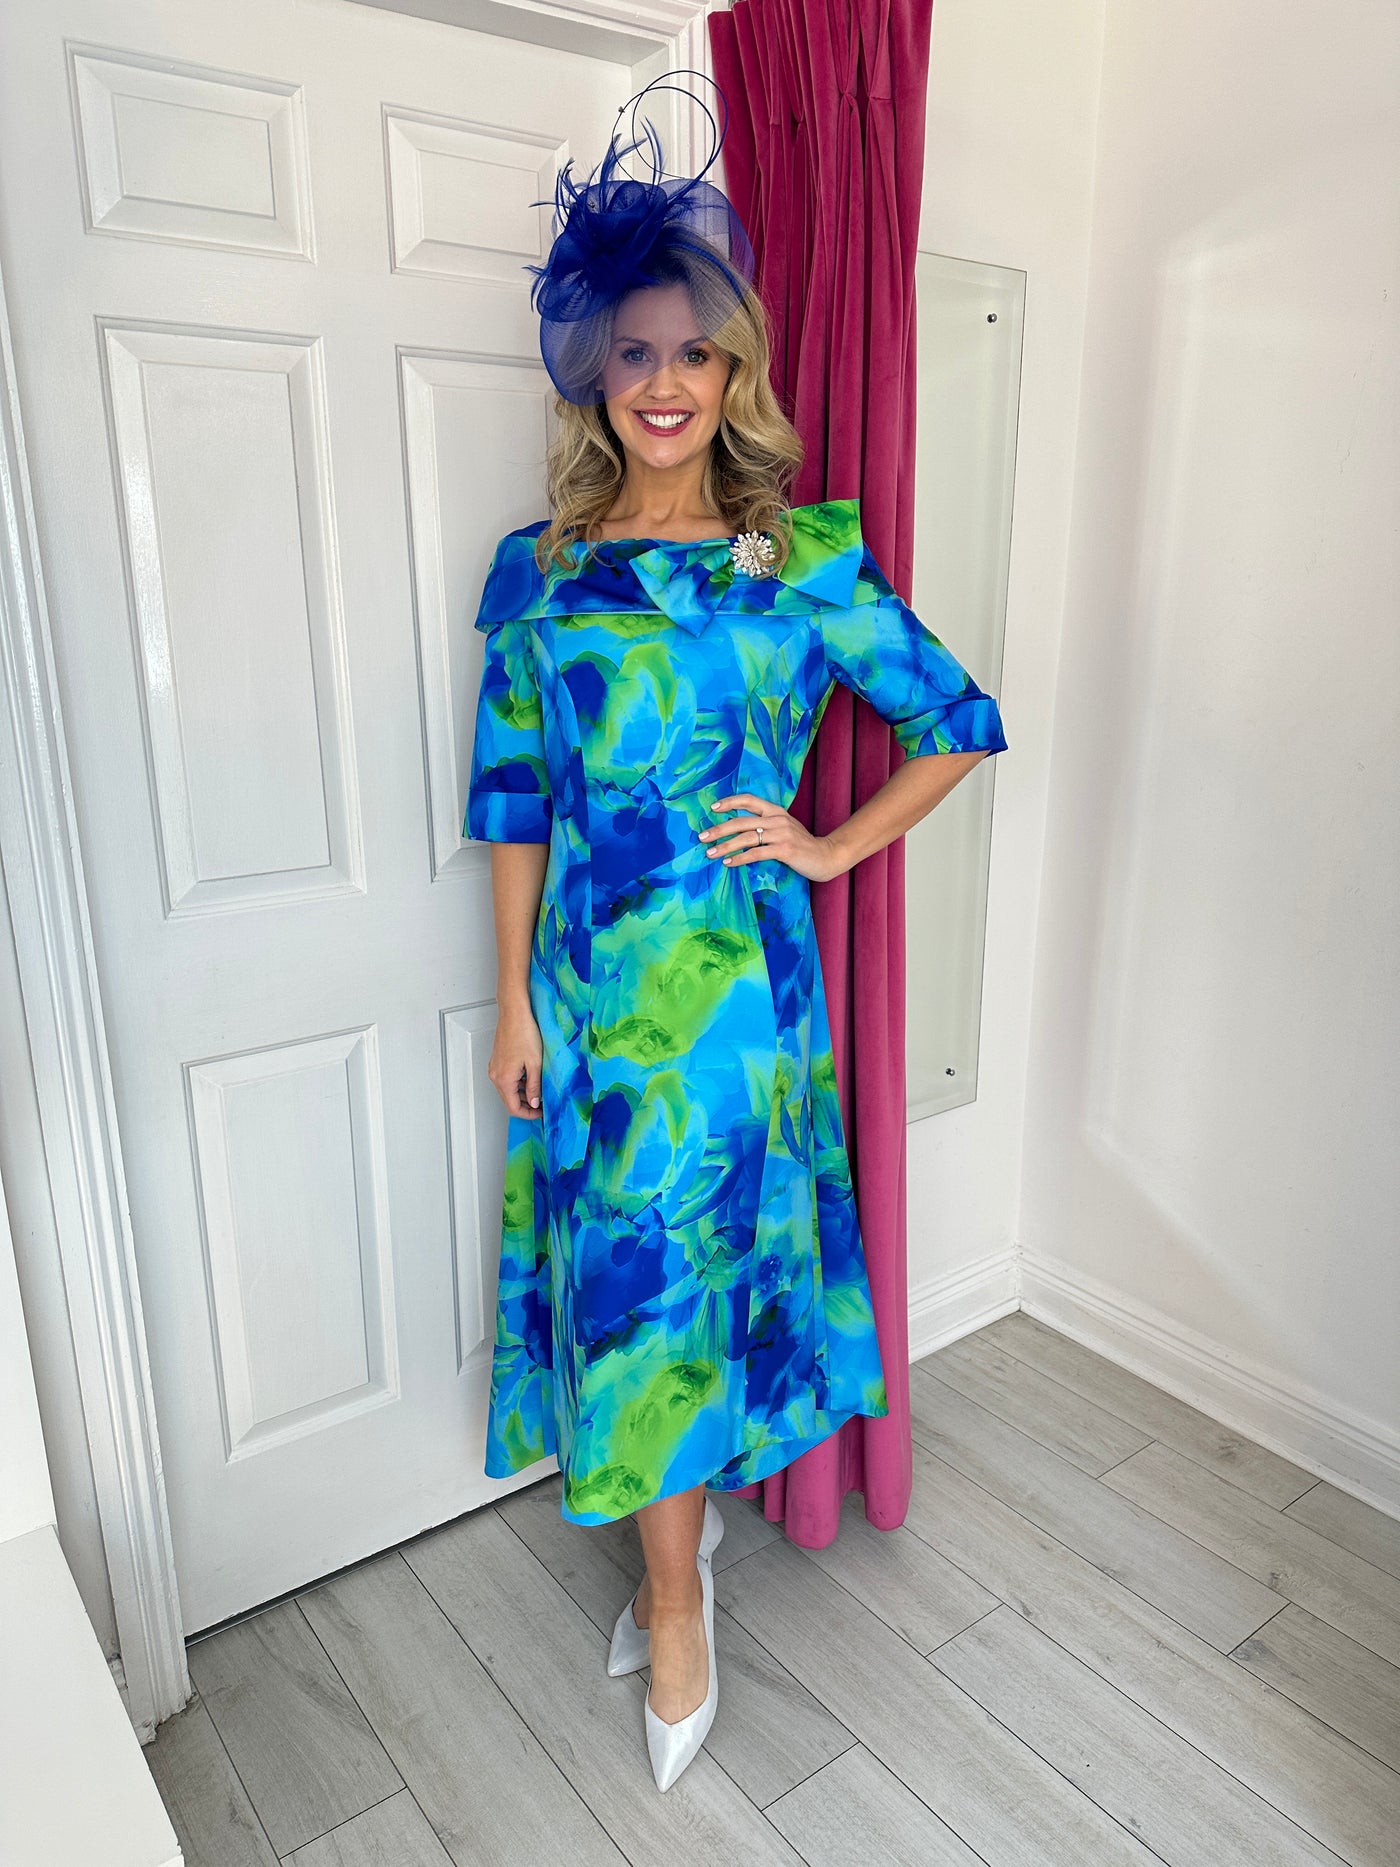 Royal Blue & Green Martha Dress with Diamonte Broach and Bow Detail